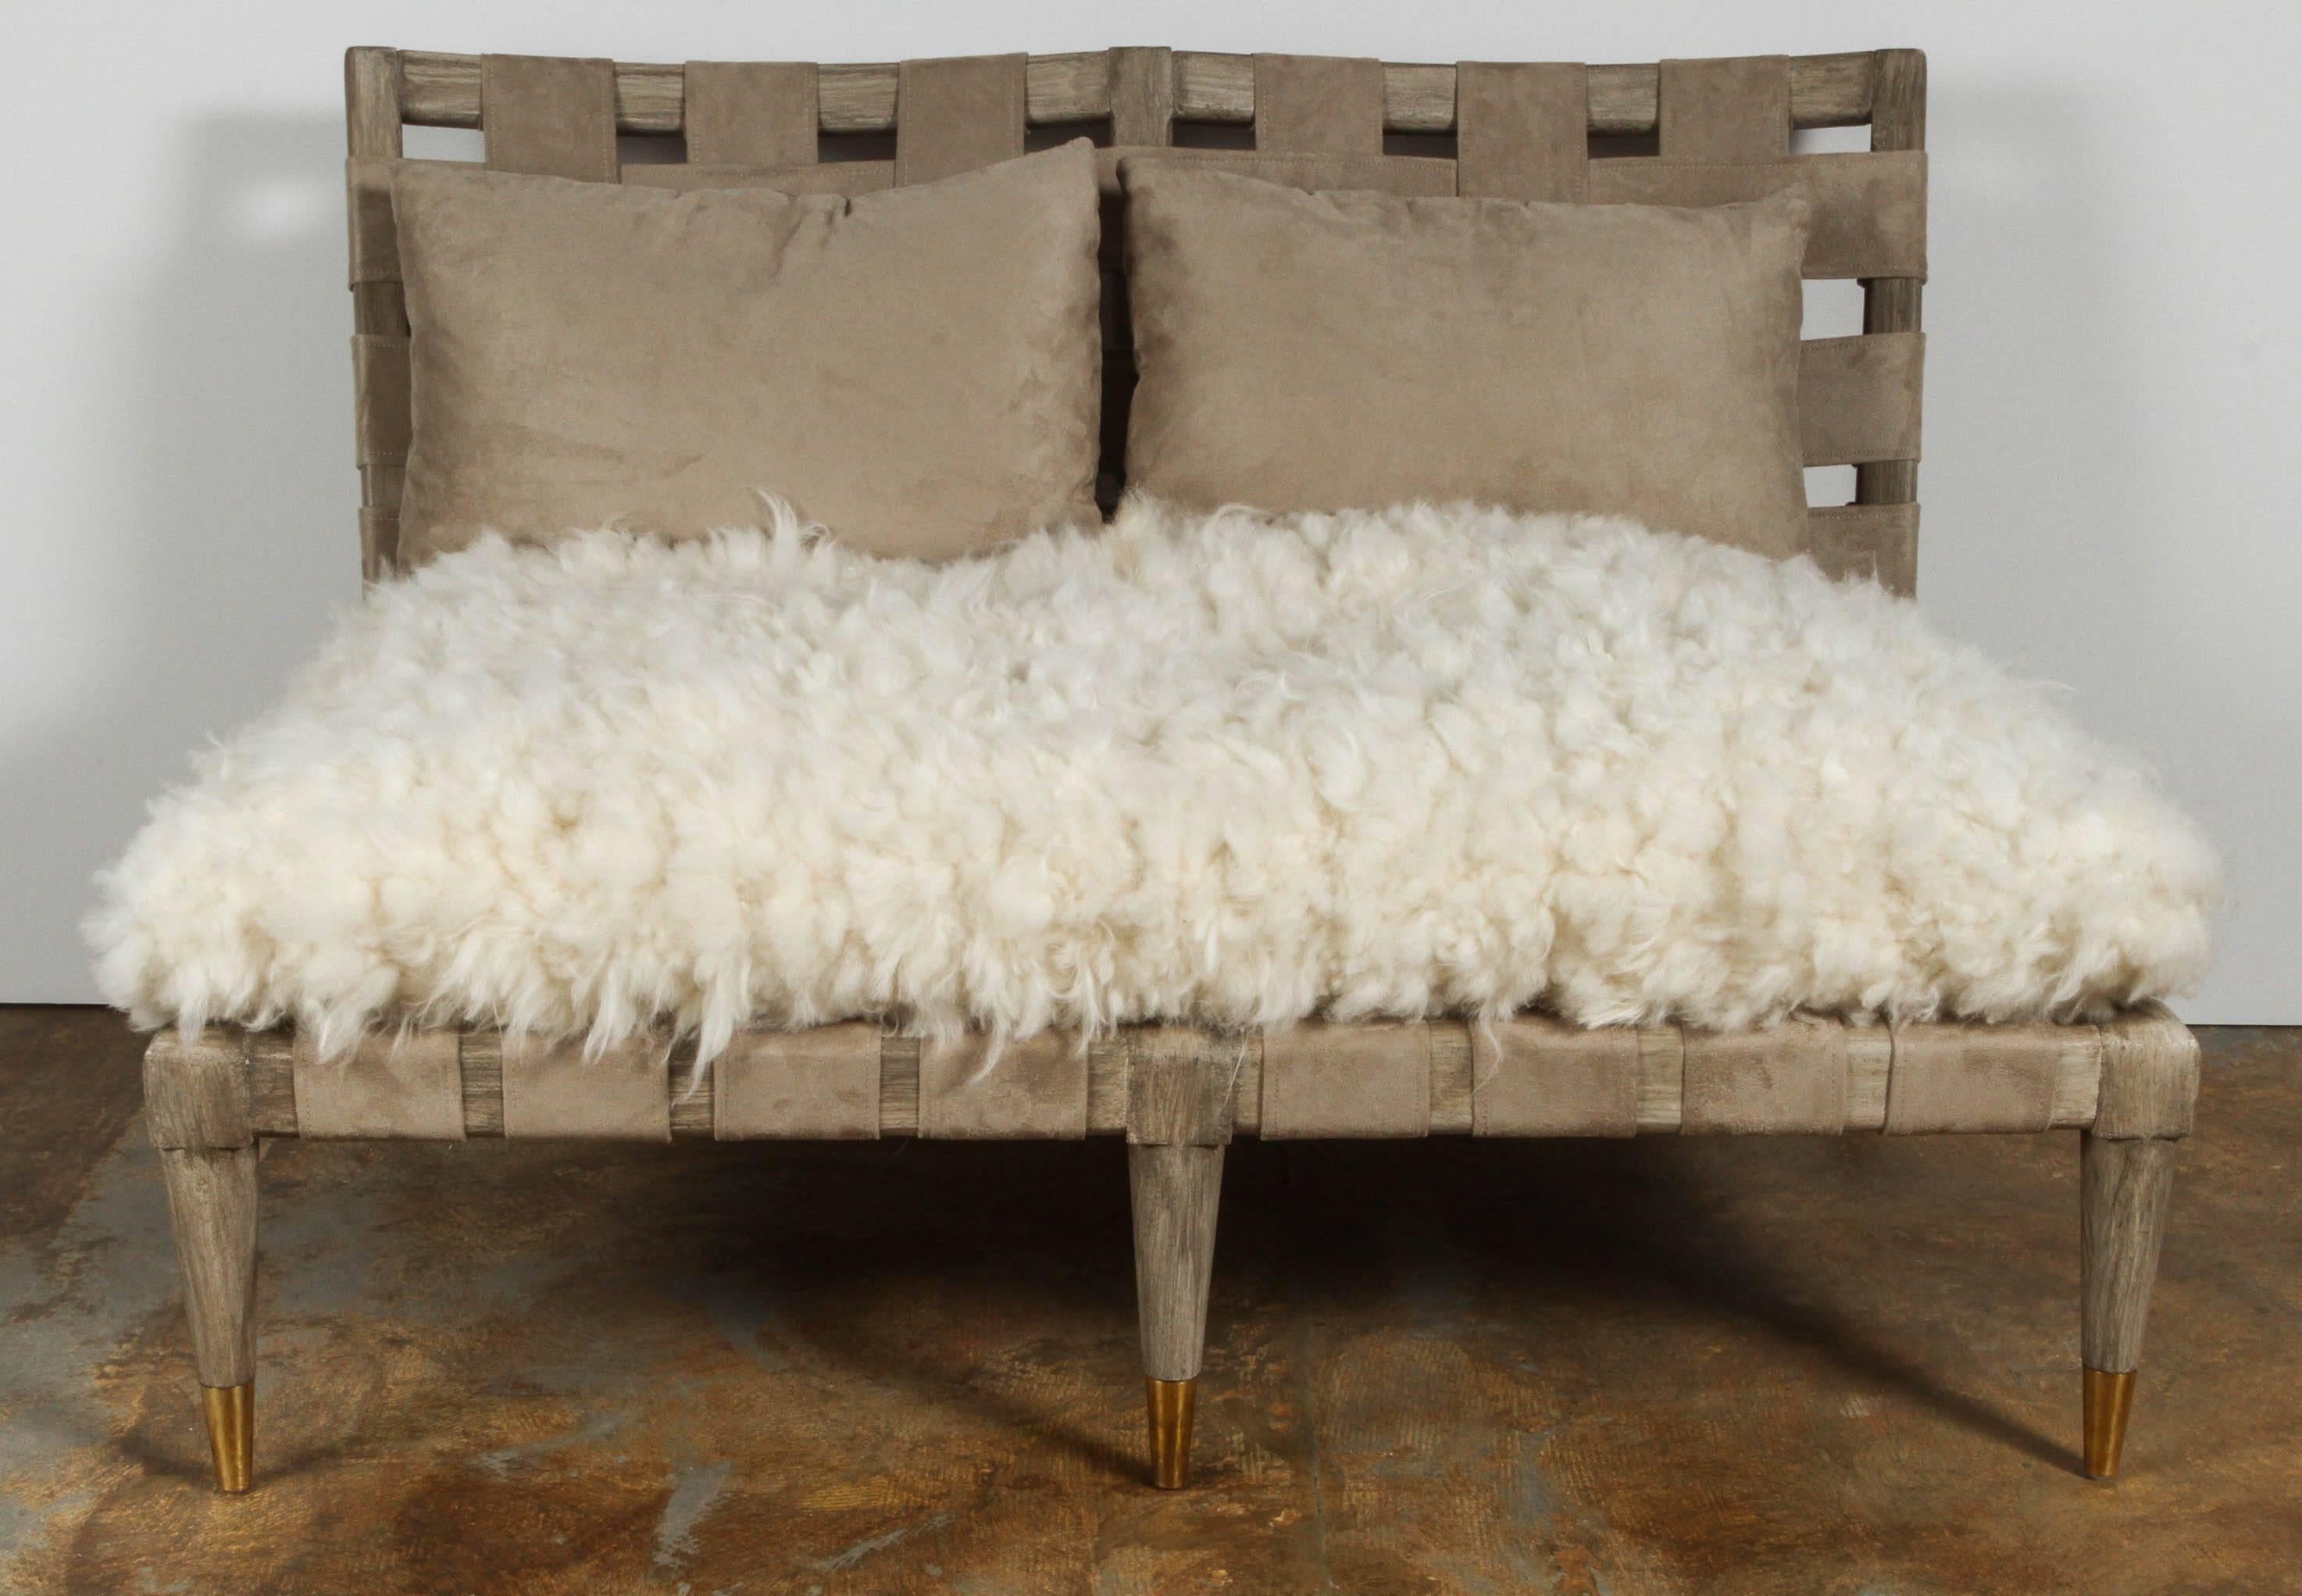 Mid-Century Modern settee sitting group with settee and chair. Totally restored with new finish, woven natural sheepskin from Denmark, custom-made ultra-suede straps and pillows (shown on settee), sabots with new unlacquered brass finish. 

Chair